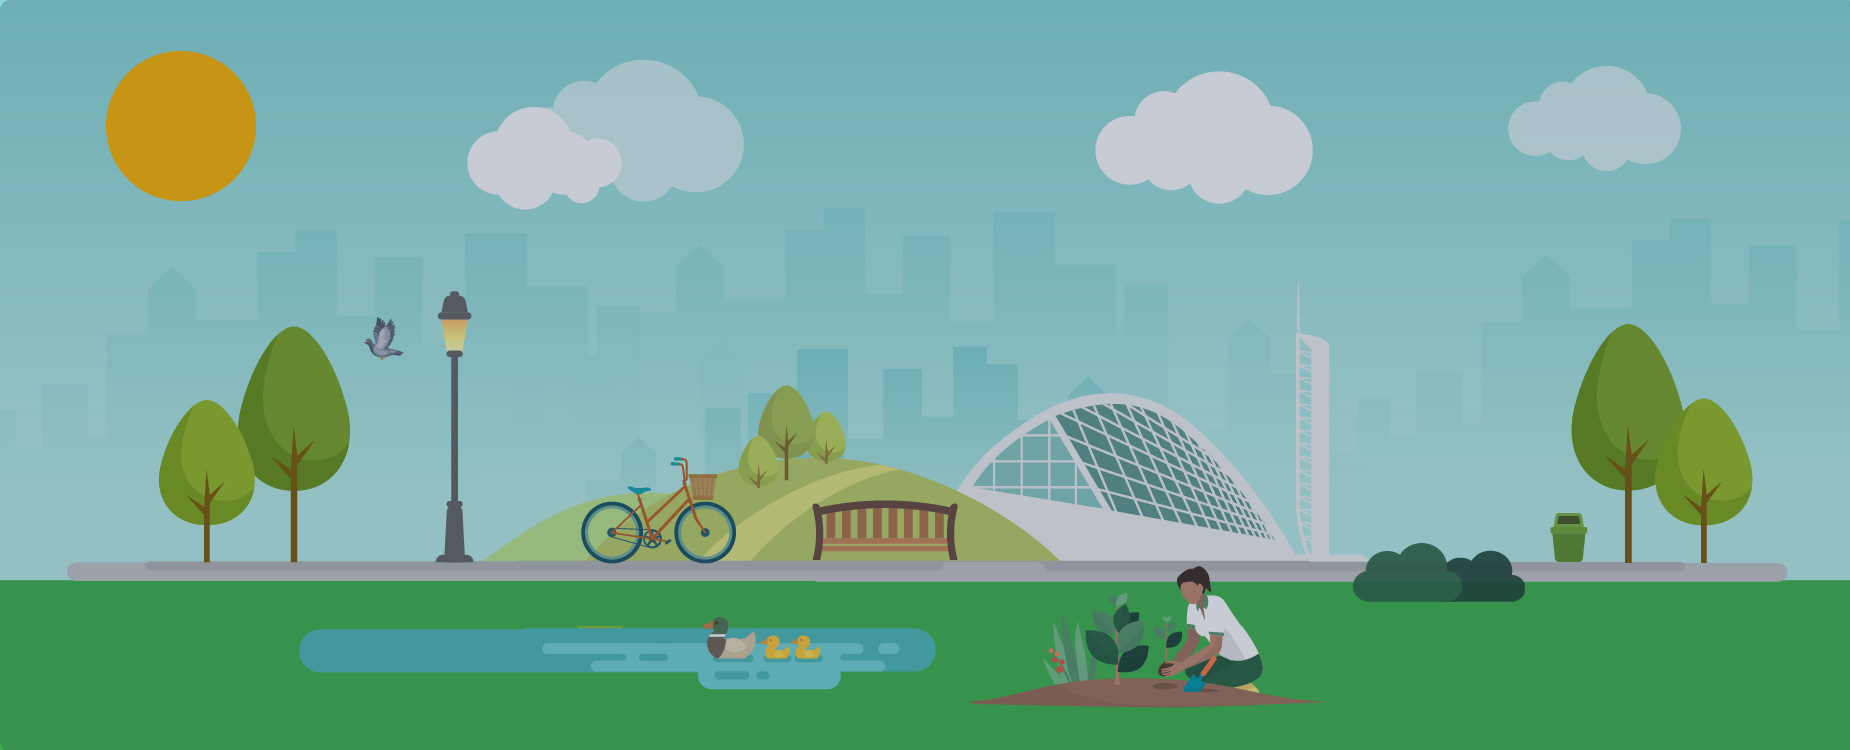 An illustration shows Glasgow Science Centre surrounded by biodiversity